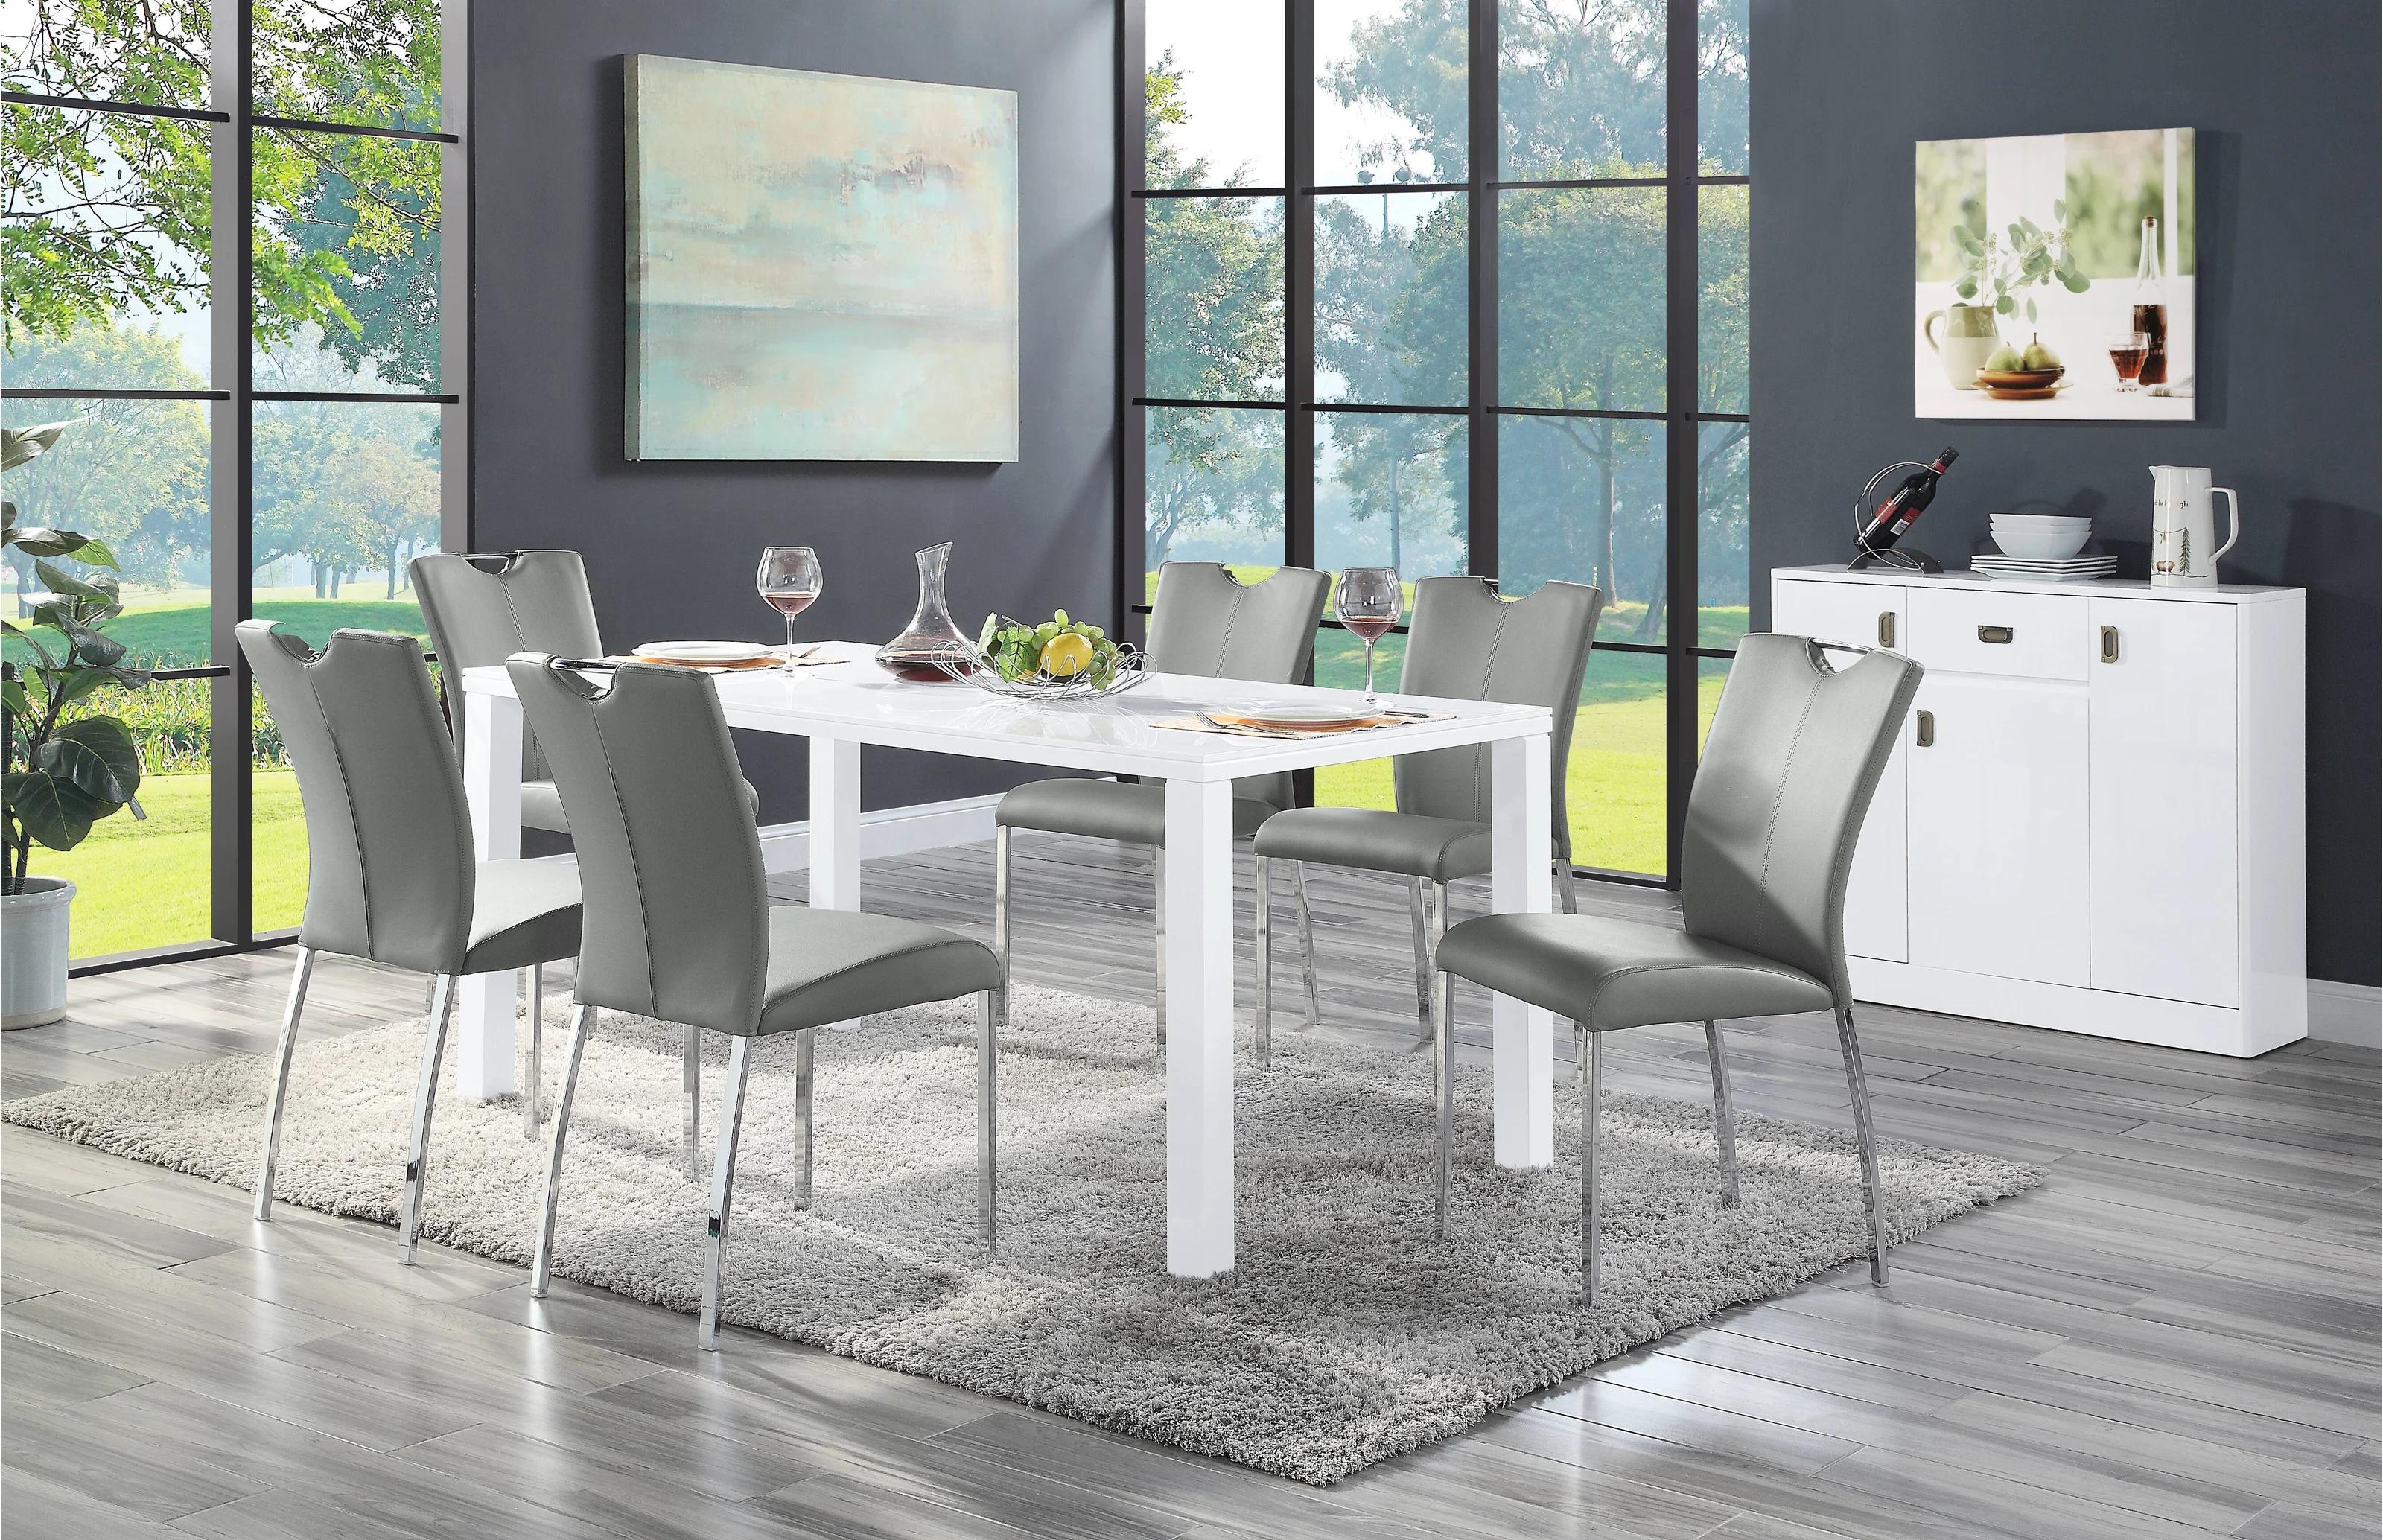 Modern, Simple Dining Room Set Pagan DN00740-8pcs in White 